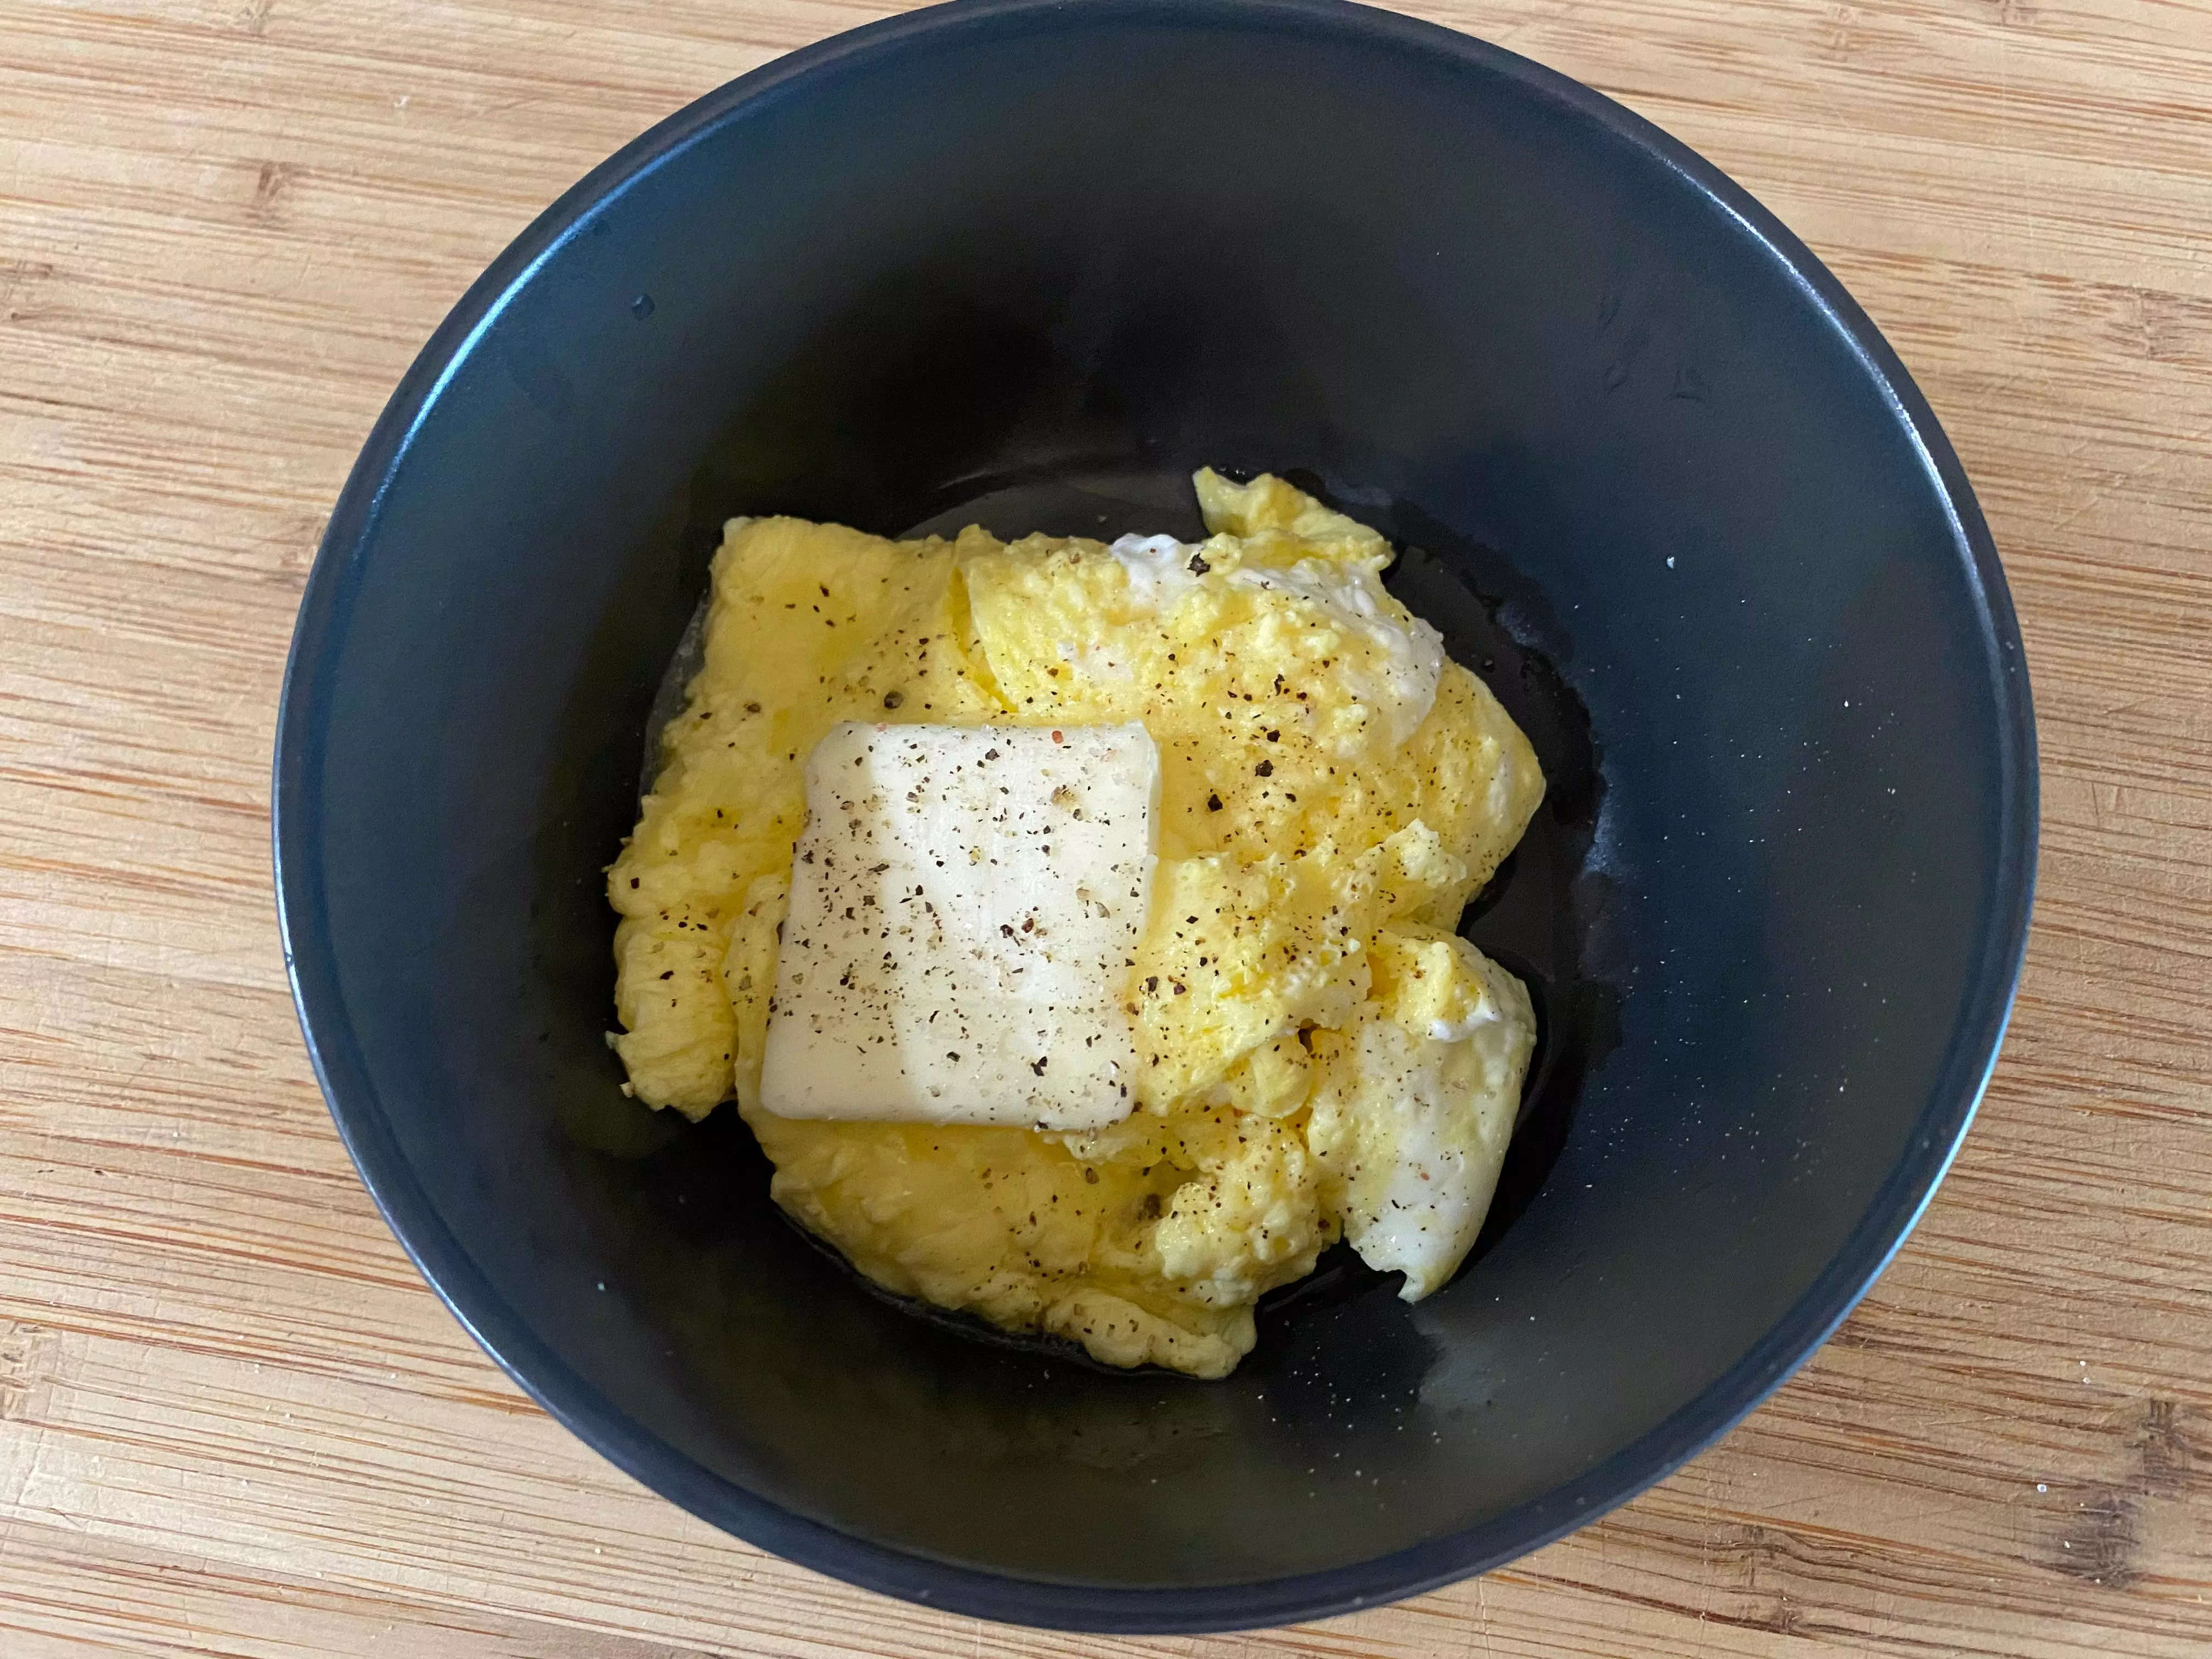 I Tried the 'Whirlpool' Trick to Make the Perfect Scramble Eggs, and Now It's My Go-to Method